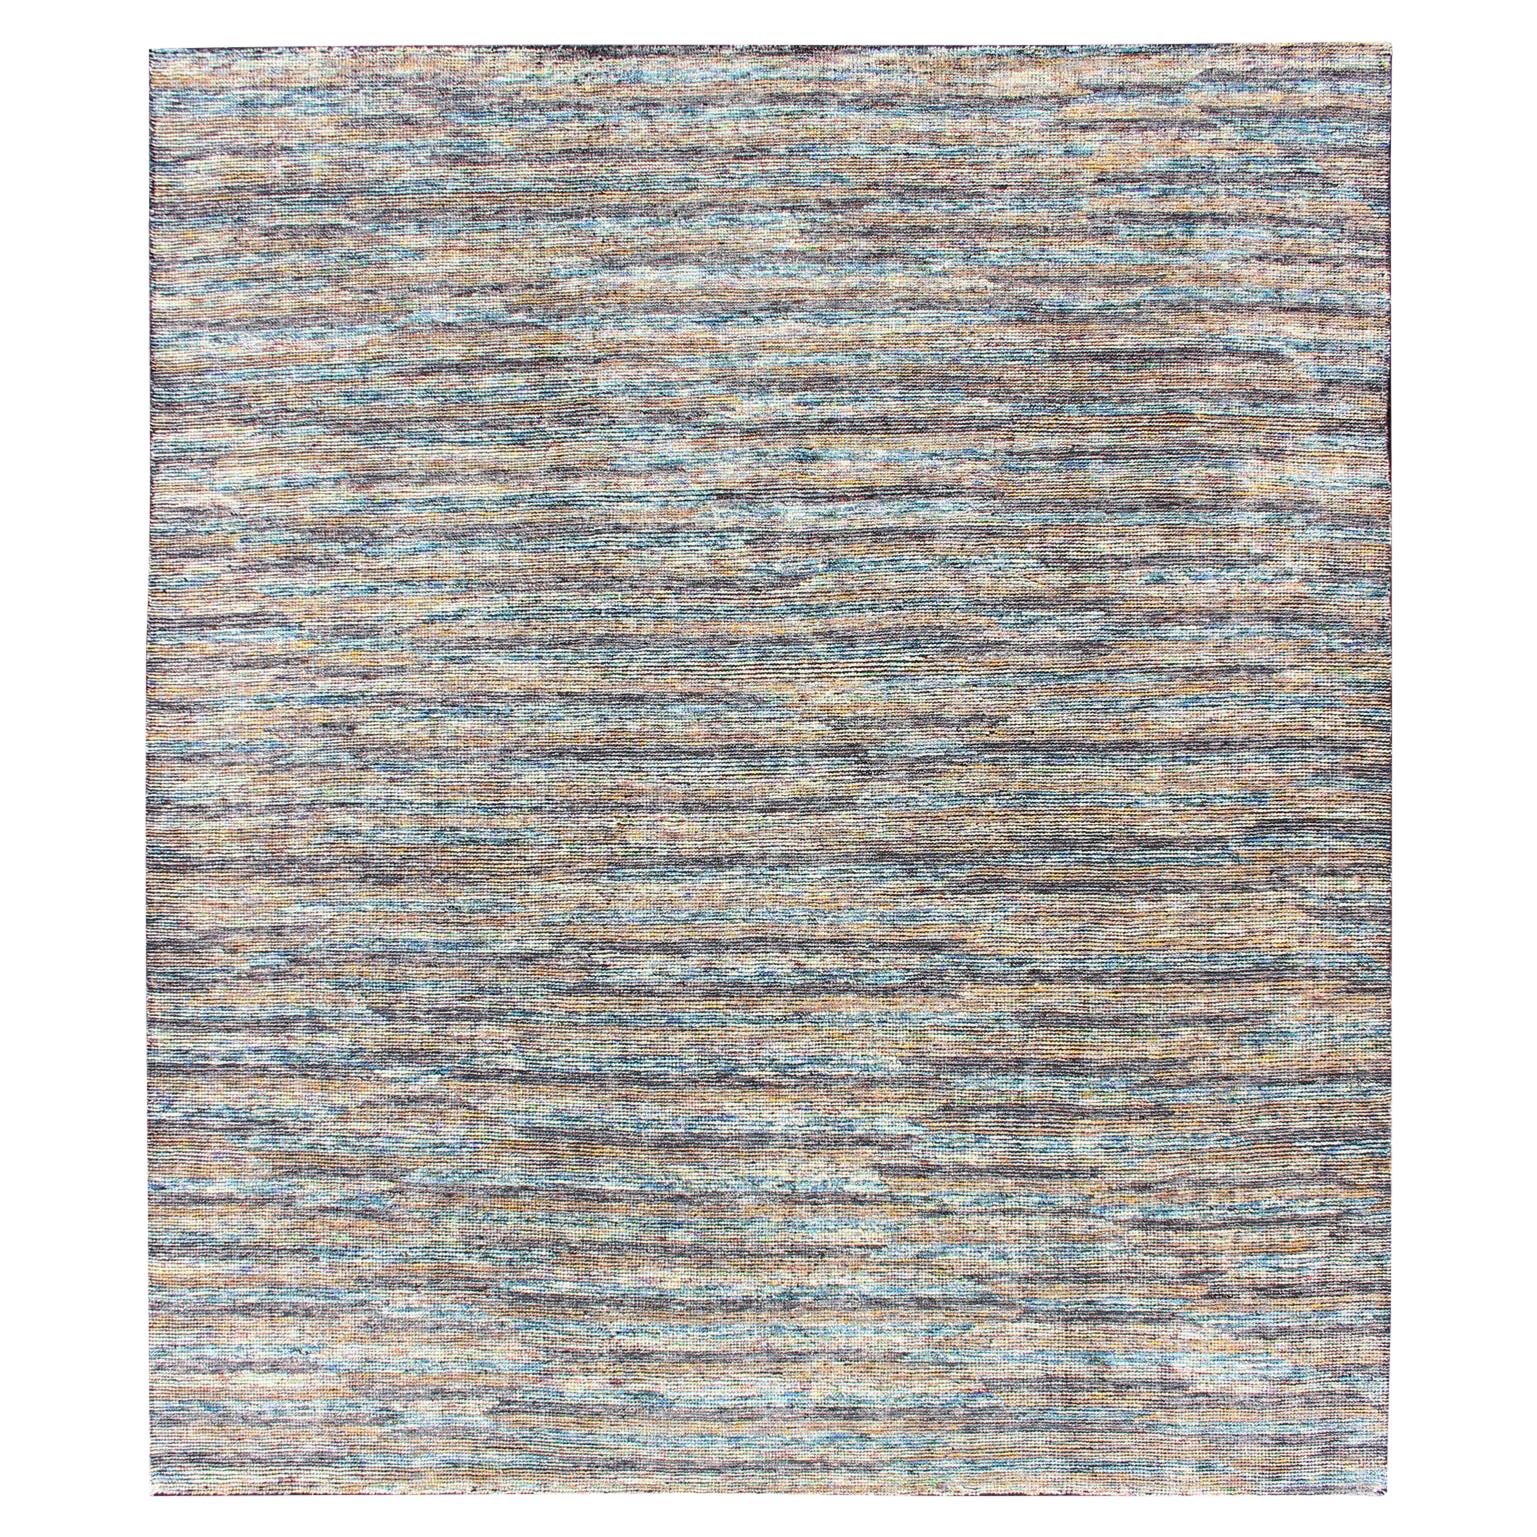 Beautiful Modern Distressed Rug in Multi Shades of Gray, Purple, Blue and Yellow